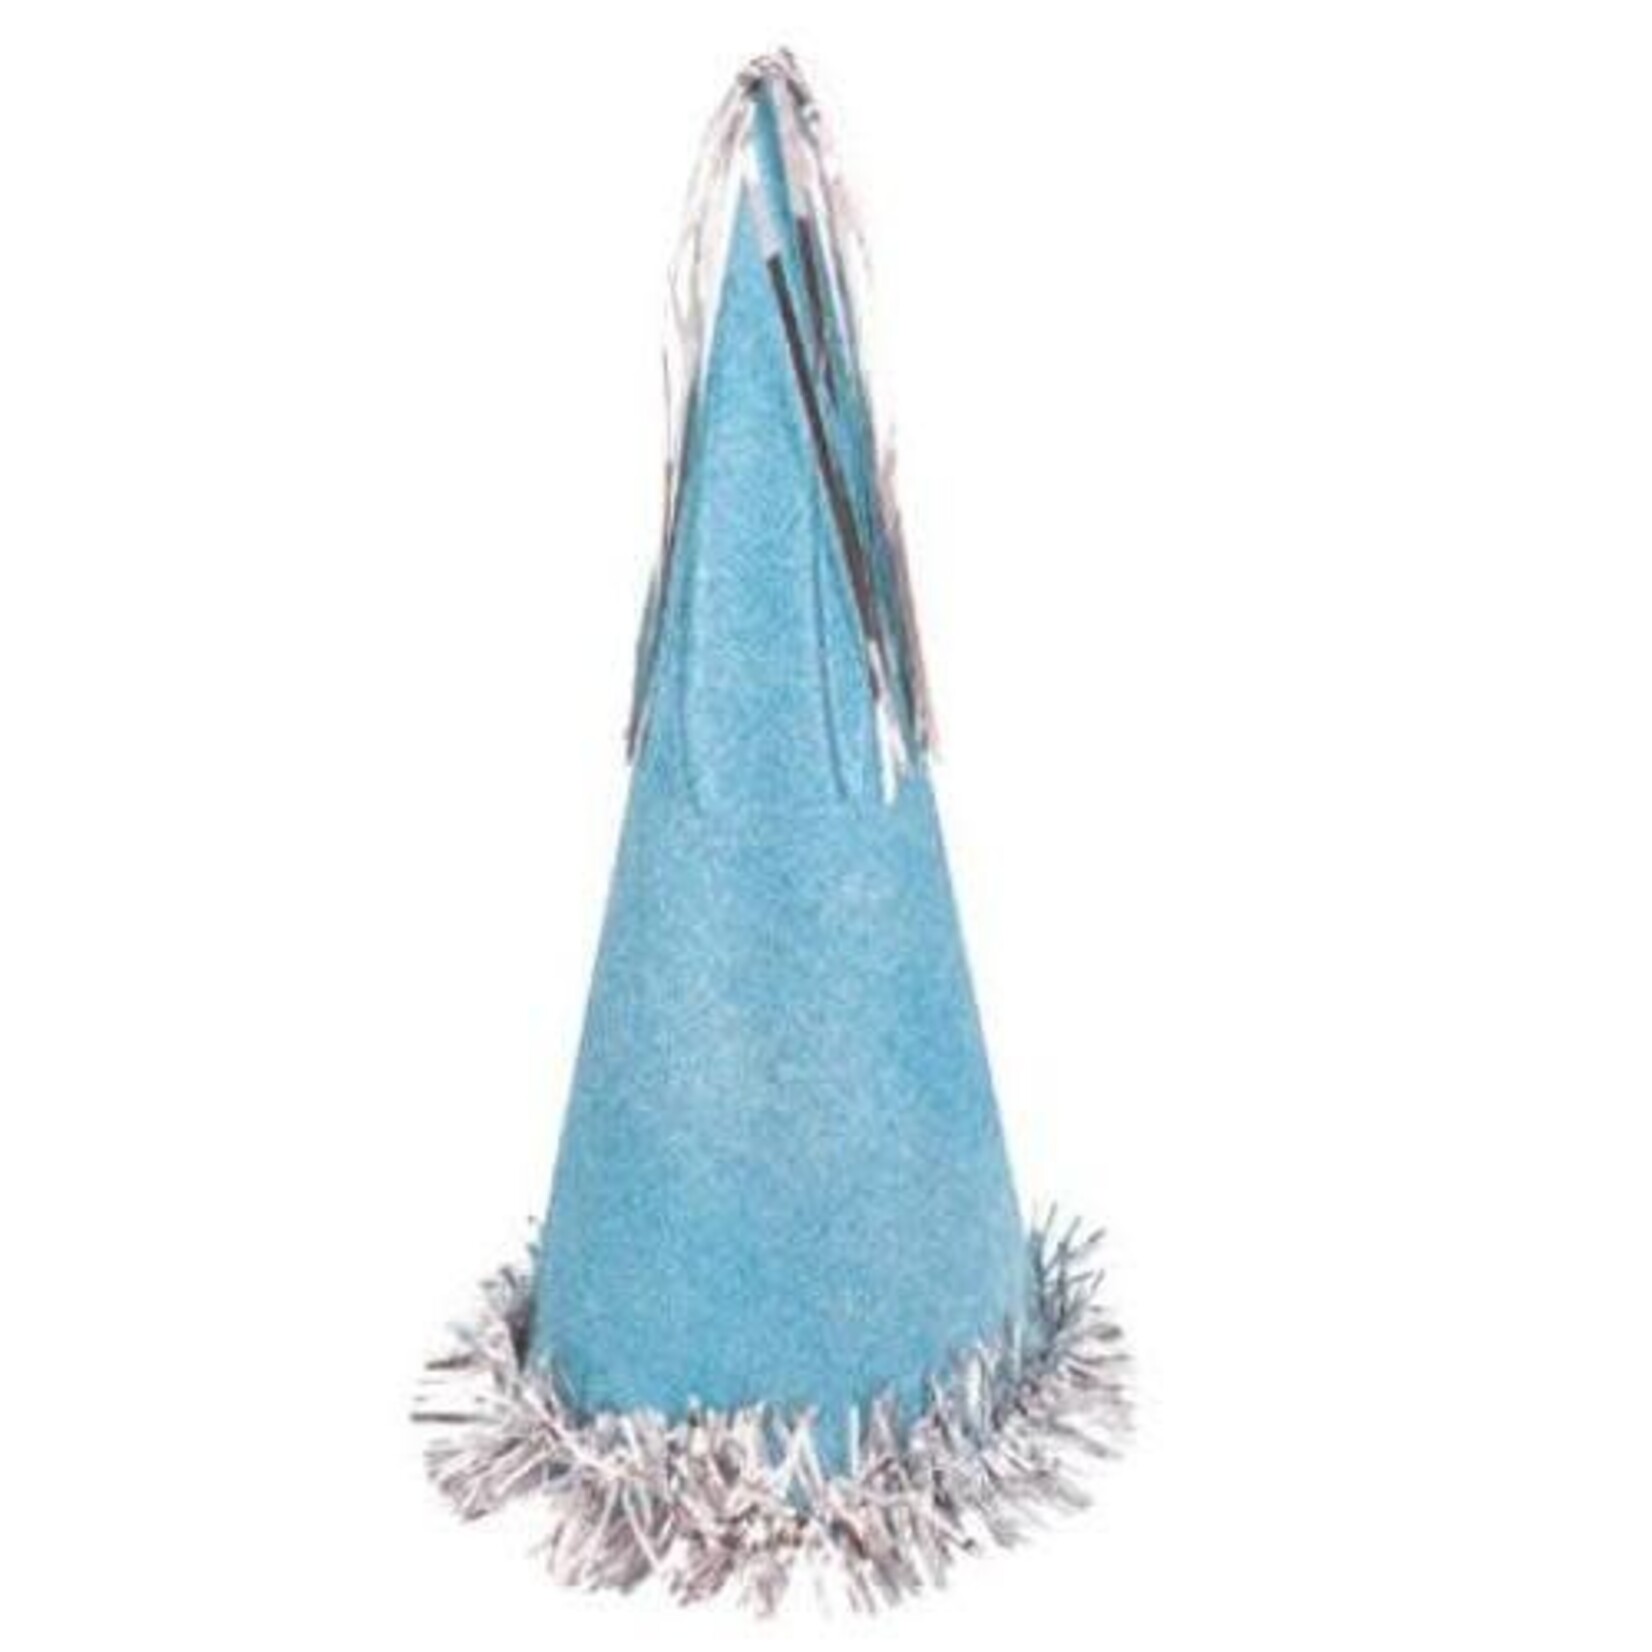 14" Glittery Hats With Fringe - Baby Blue